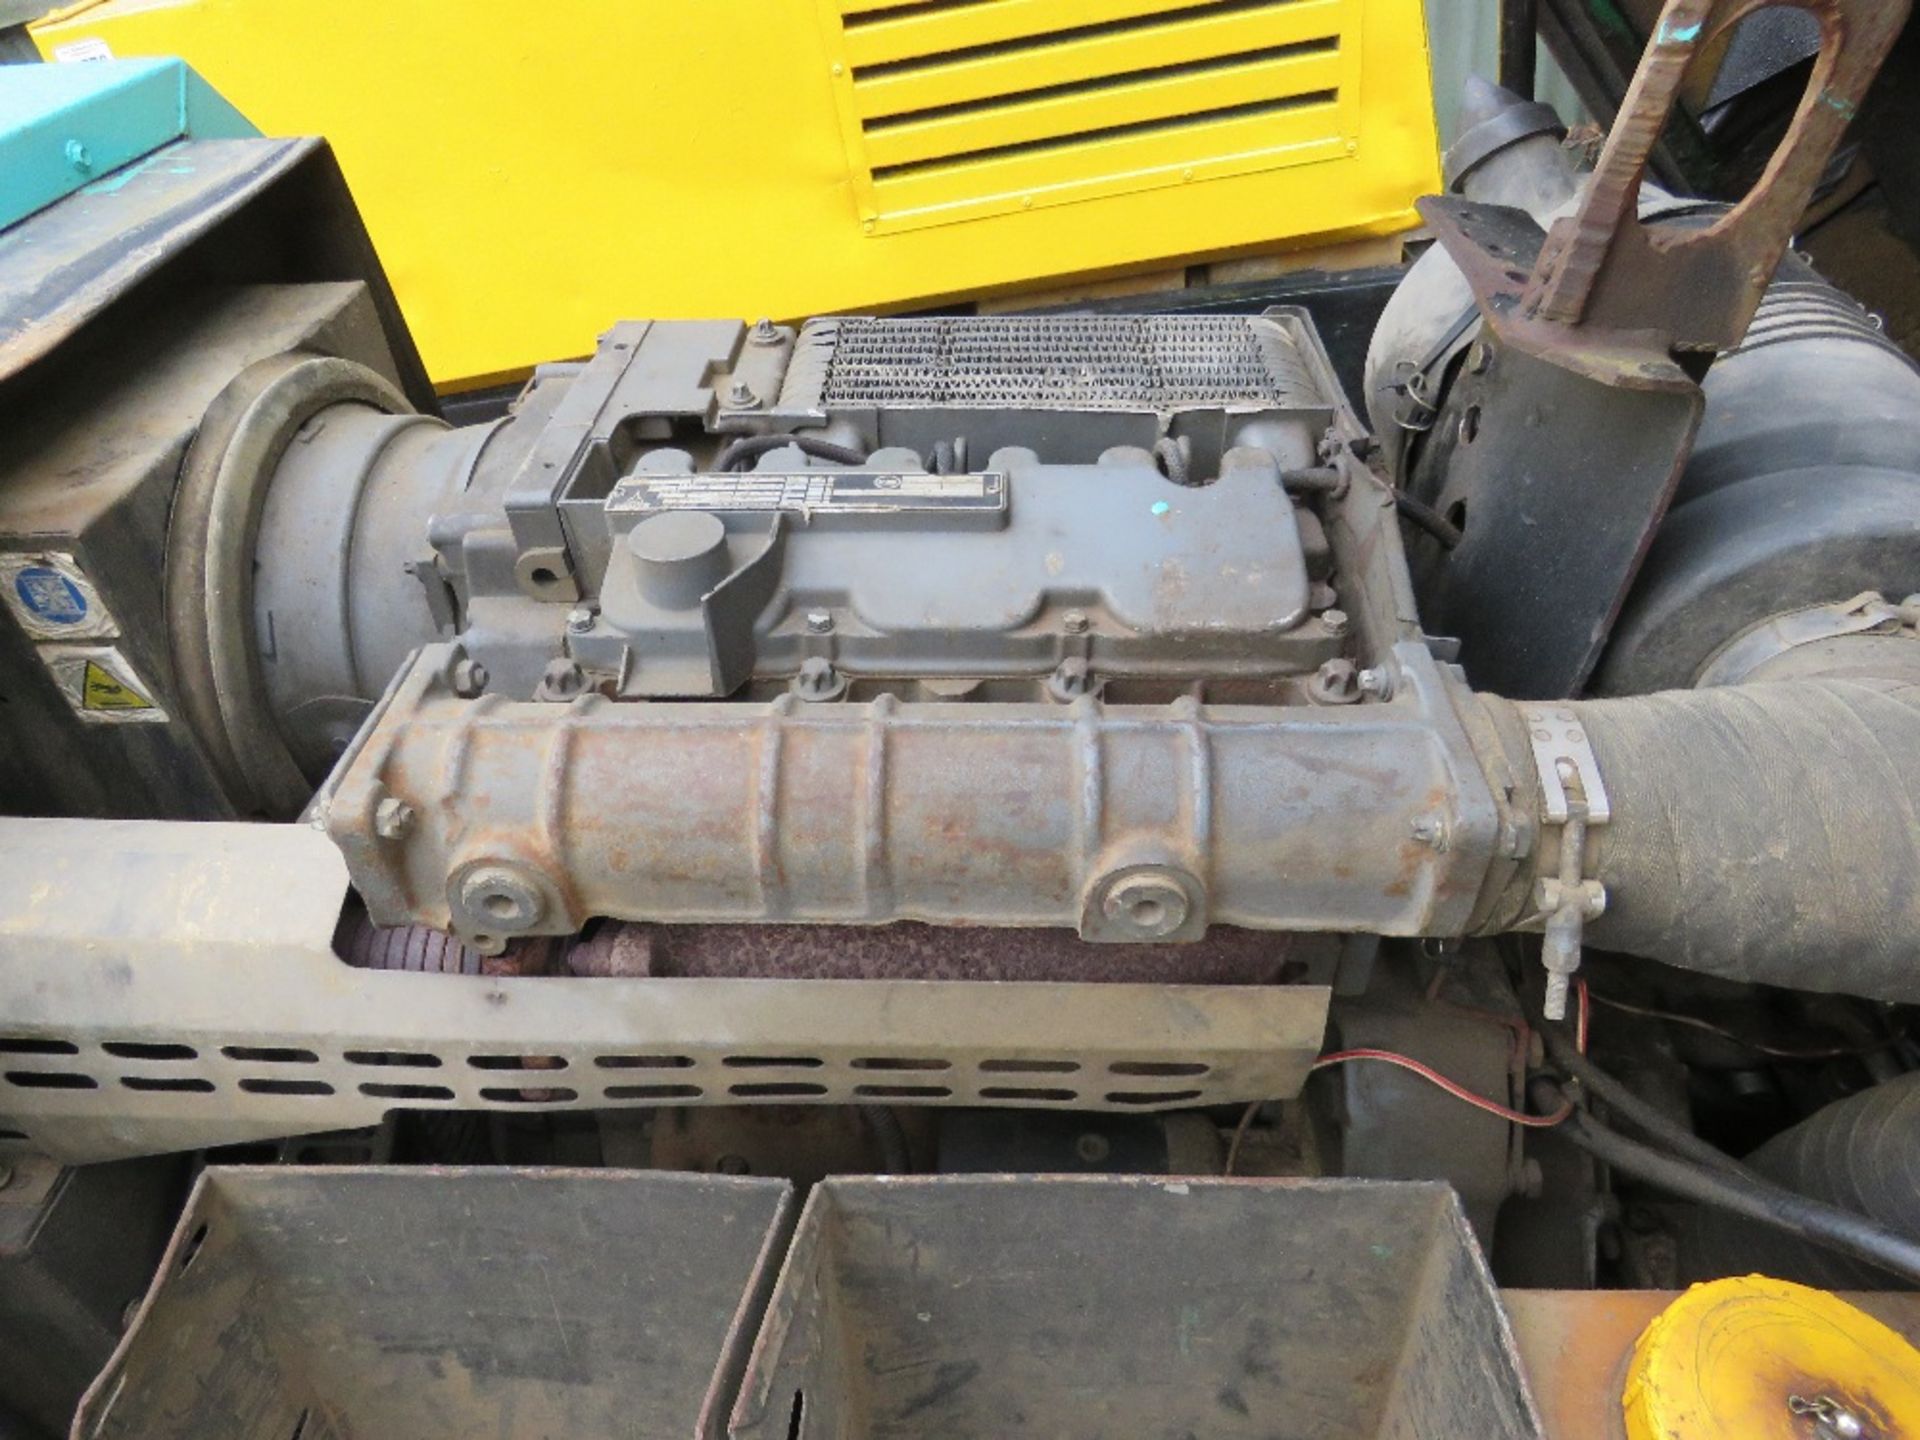 INGERSOLL RAND P130 TOWED COMPRESSOR WITH A DEUTZ ENGINE, YEAR 1999 BUILD. WHEN TESTED WAS SEEN TO R - Image 2 of 5